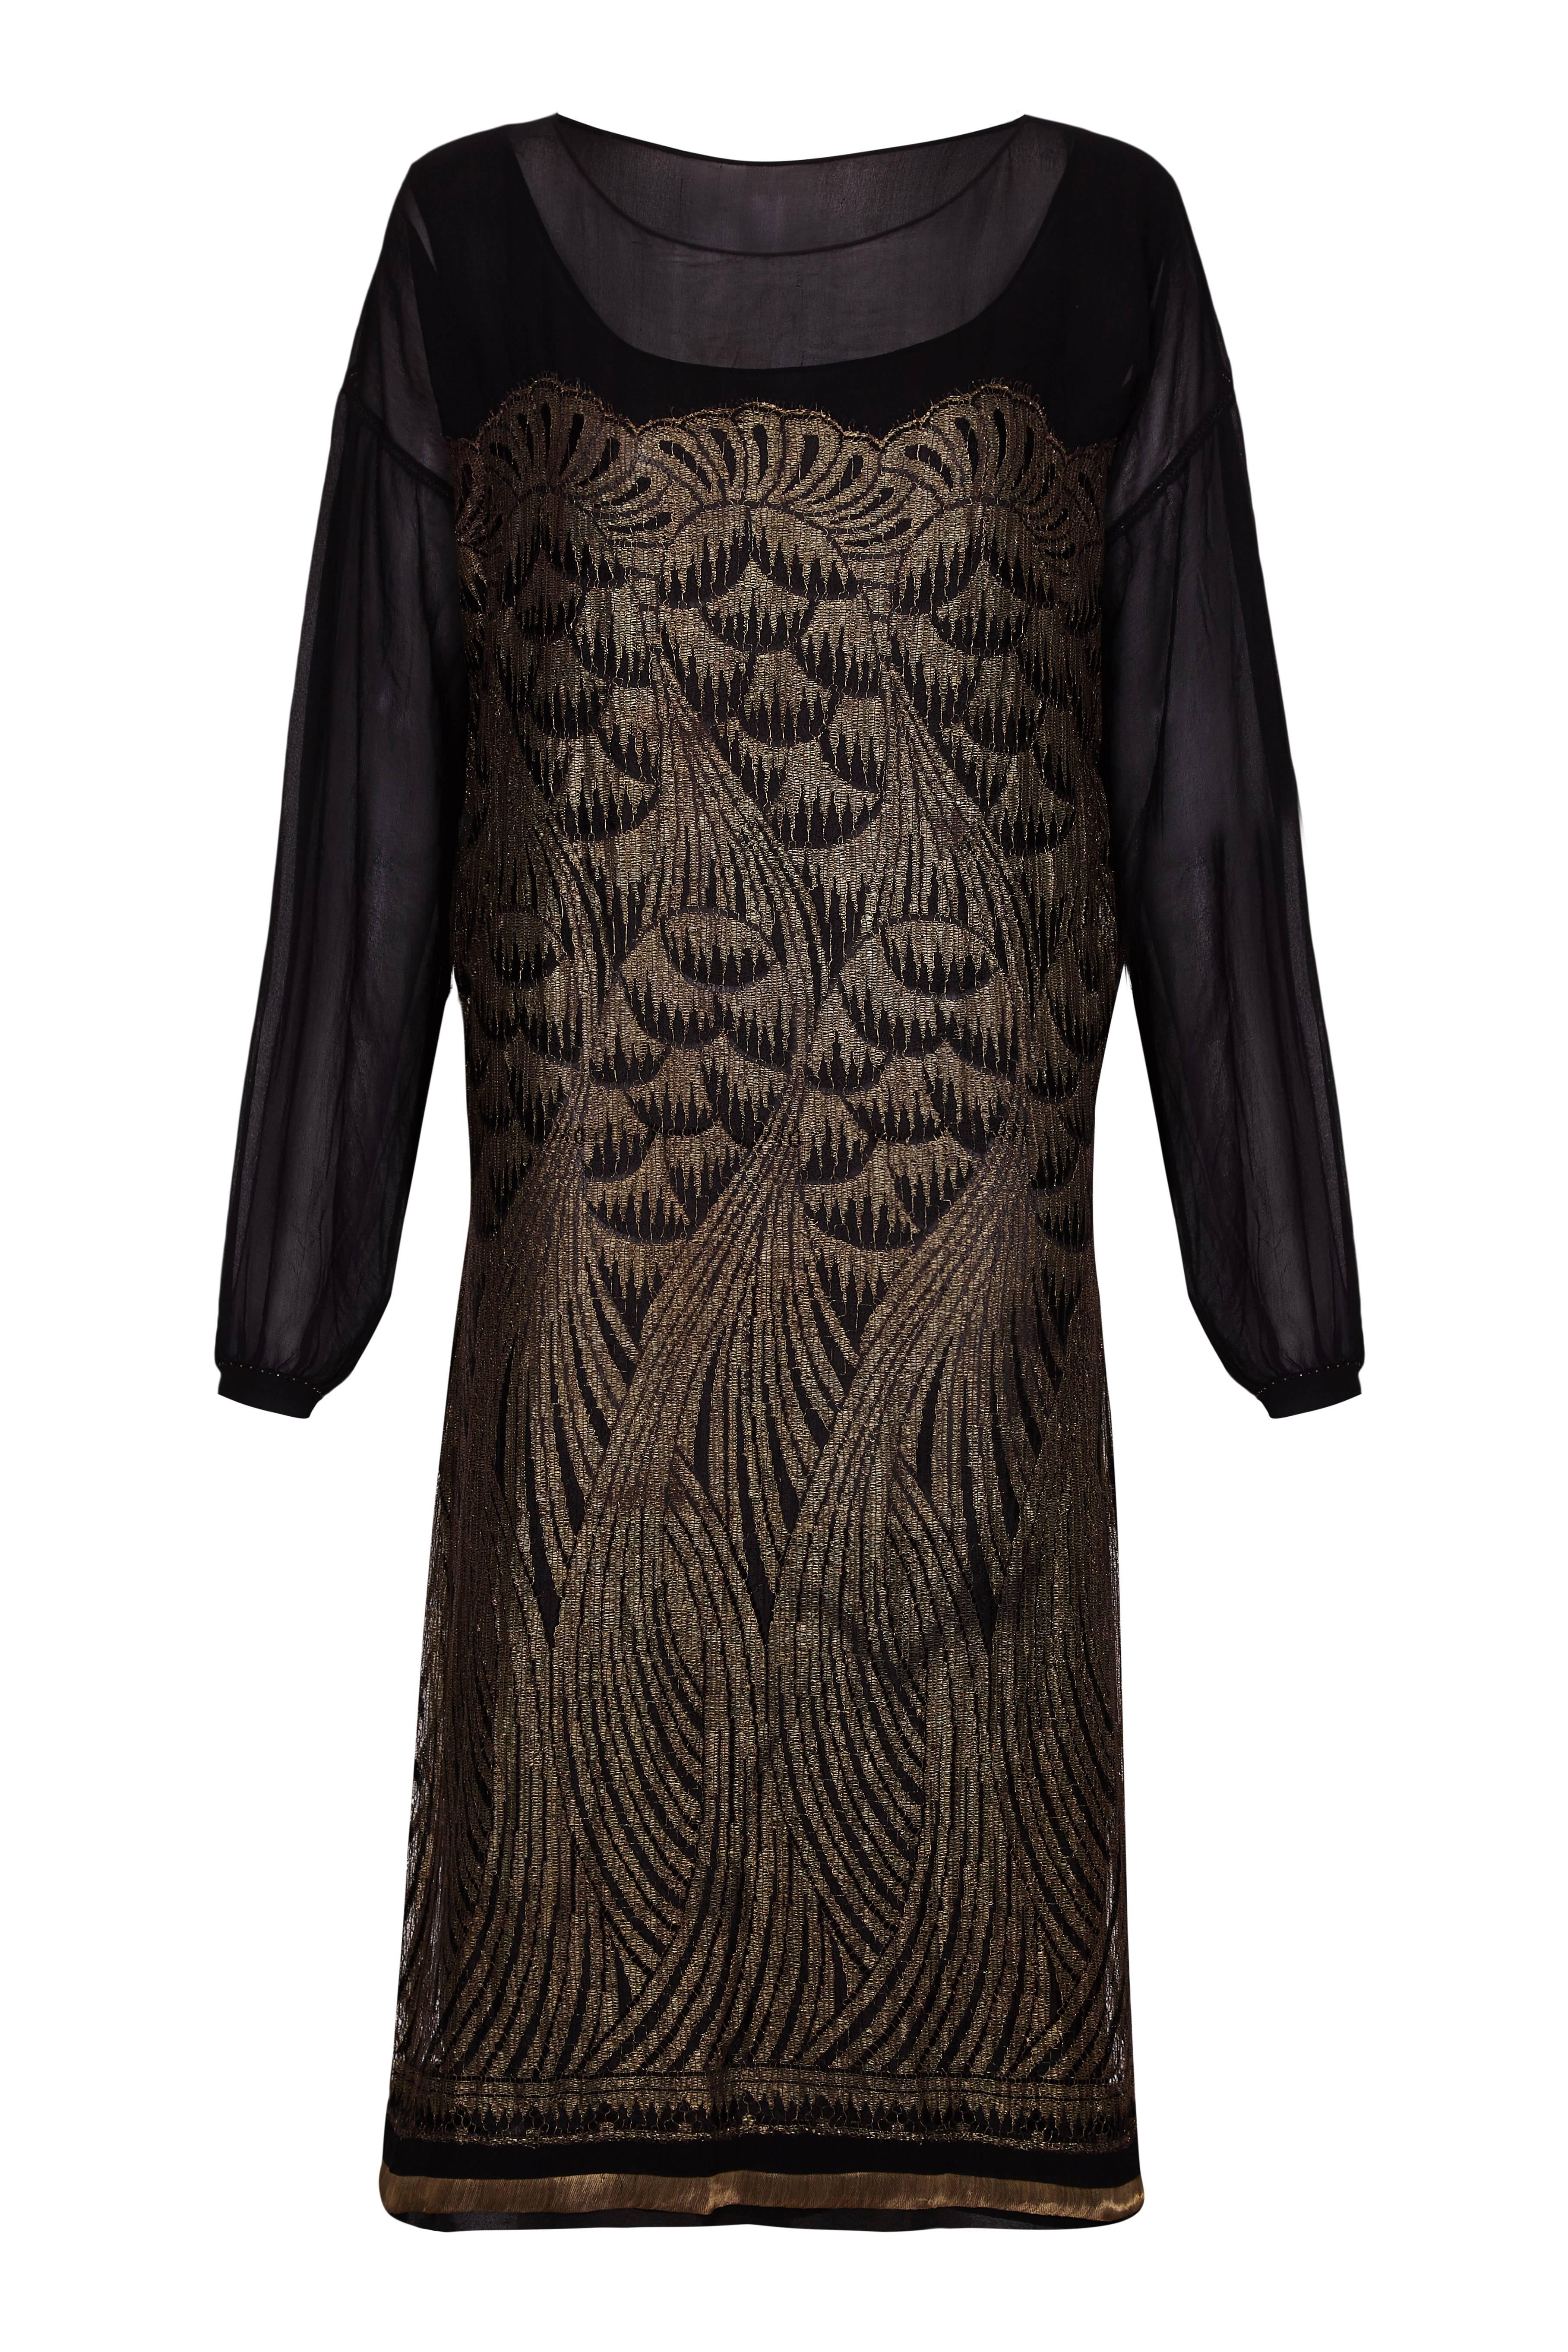 This incredible original 1920s black silk chiffon flapper dress with opulent gold lame Art Deco design is a rare find and in beautiful vintage condition with a striking, contemporary aesthetic. The dress is straight cut in typical flapper style with